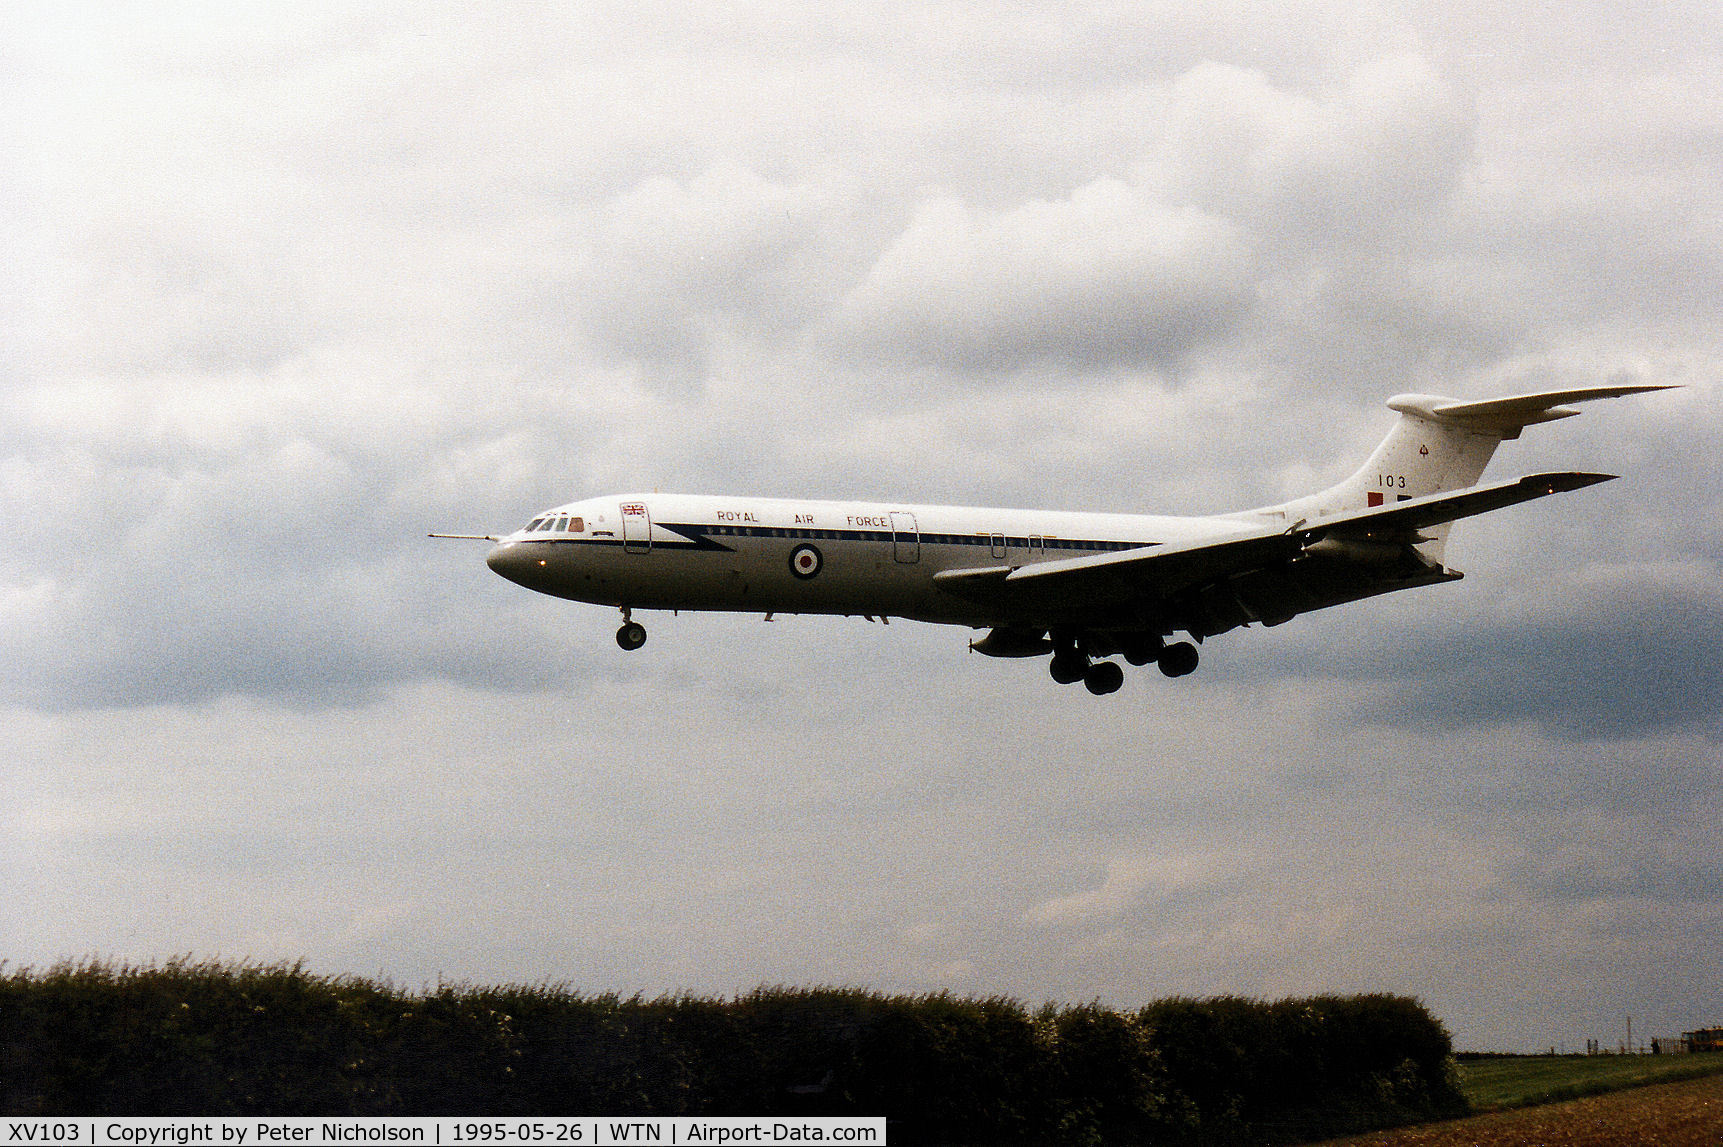 XV103, 1967 Vickers VC10 C.1K C/N 833, VC-10 C.1K of RAF Brize Norton's 10 Squadron on final approach to RAF Waddington in May 1995.